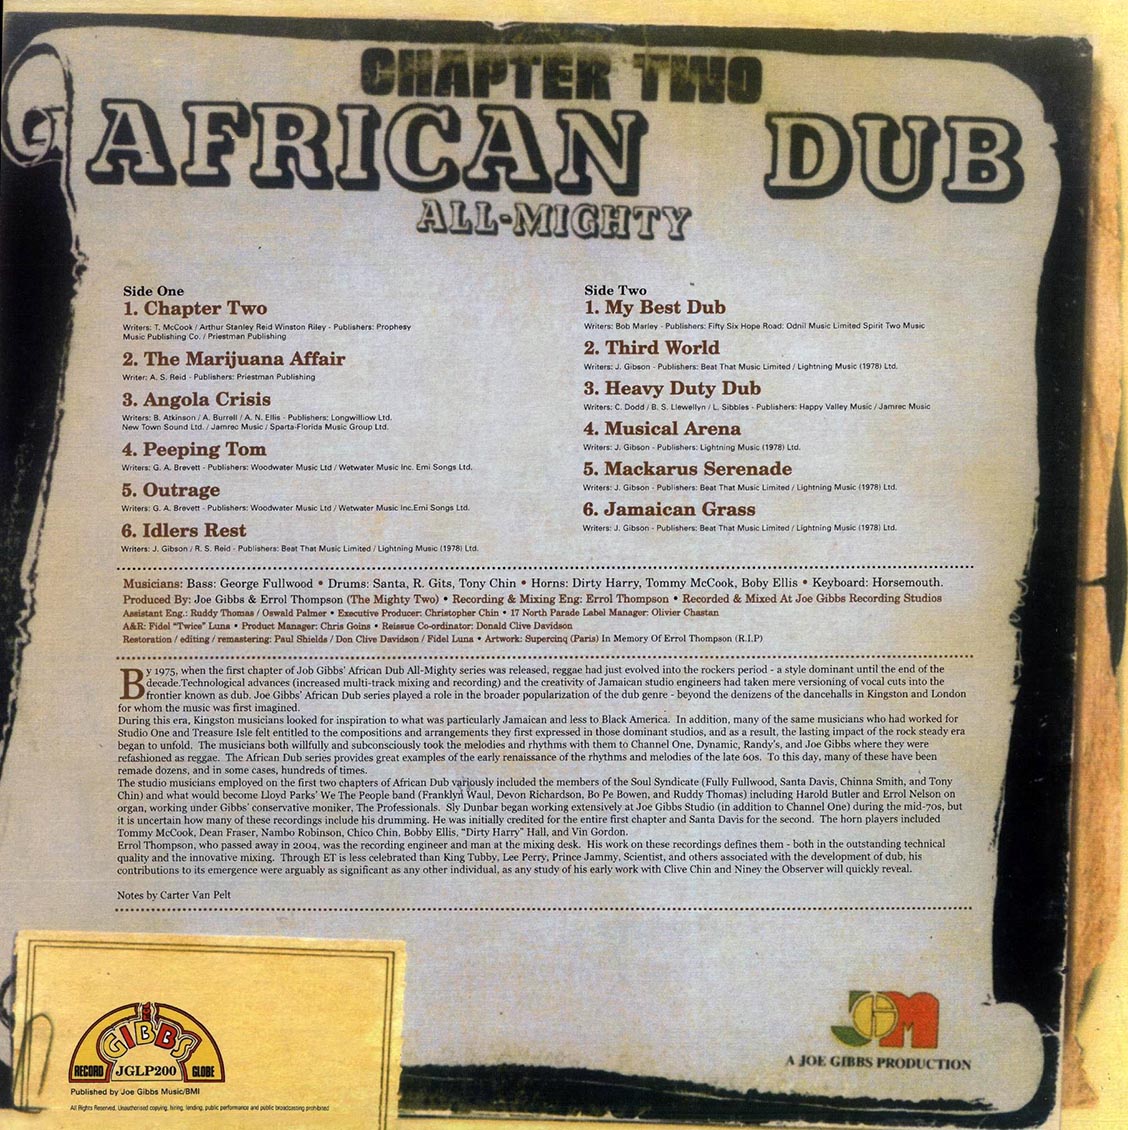 Joe Gibbs & The Professionals - African Dub All Mighty Chapter 2 | Vinyl